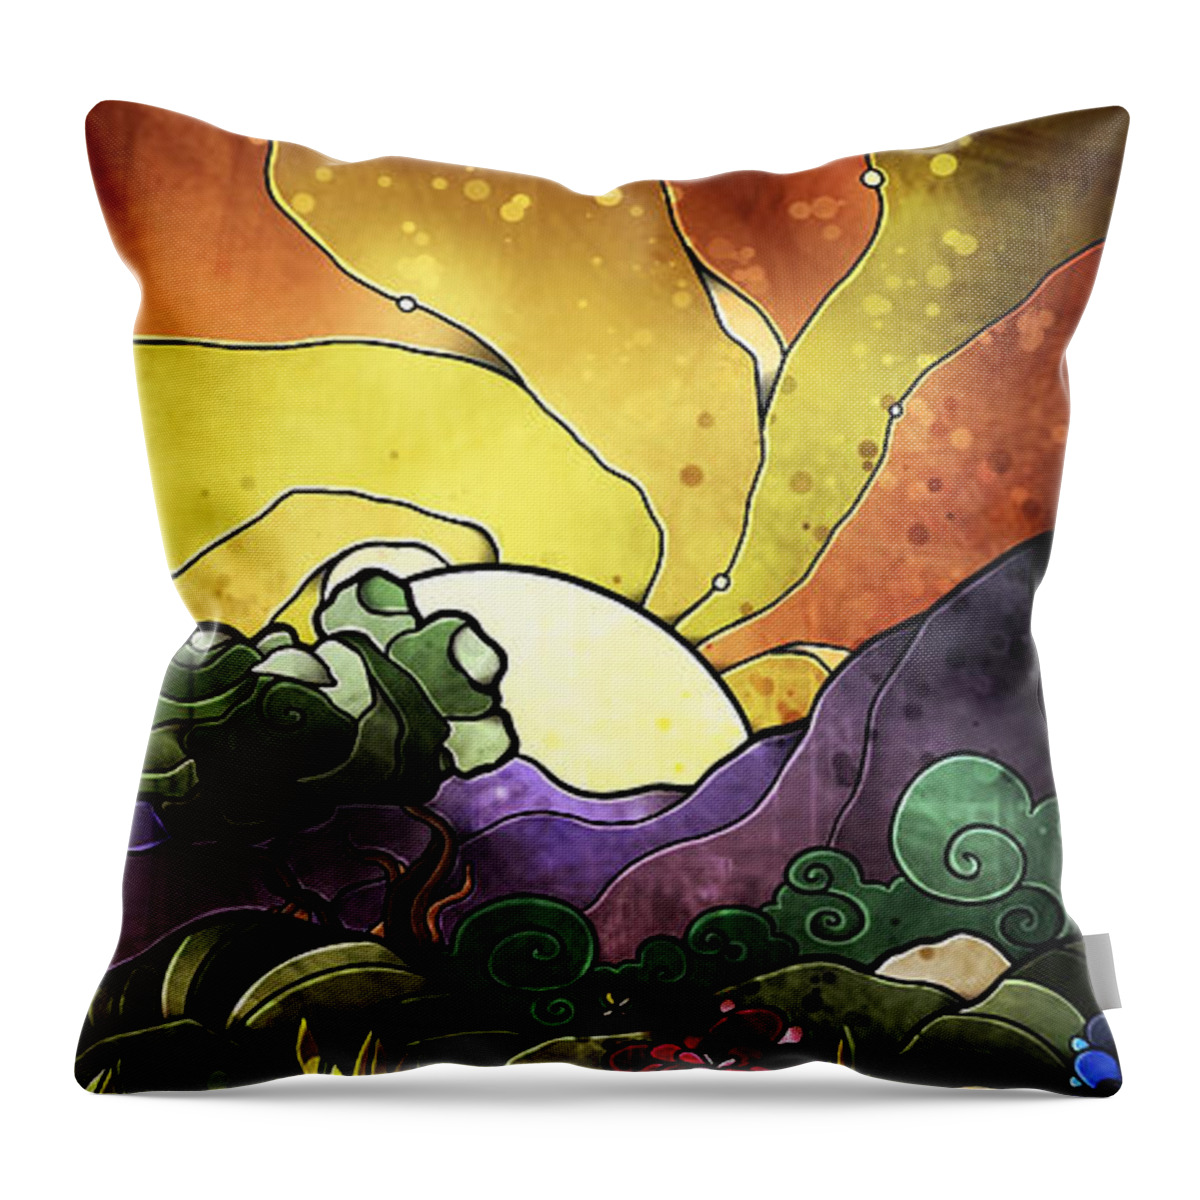 Shepherd Throw Pillow featuring the digital art The Shepherds Cottage by Mandie Manzano